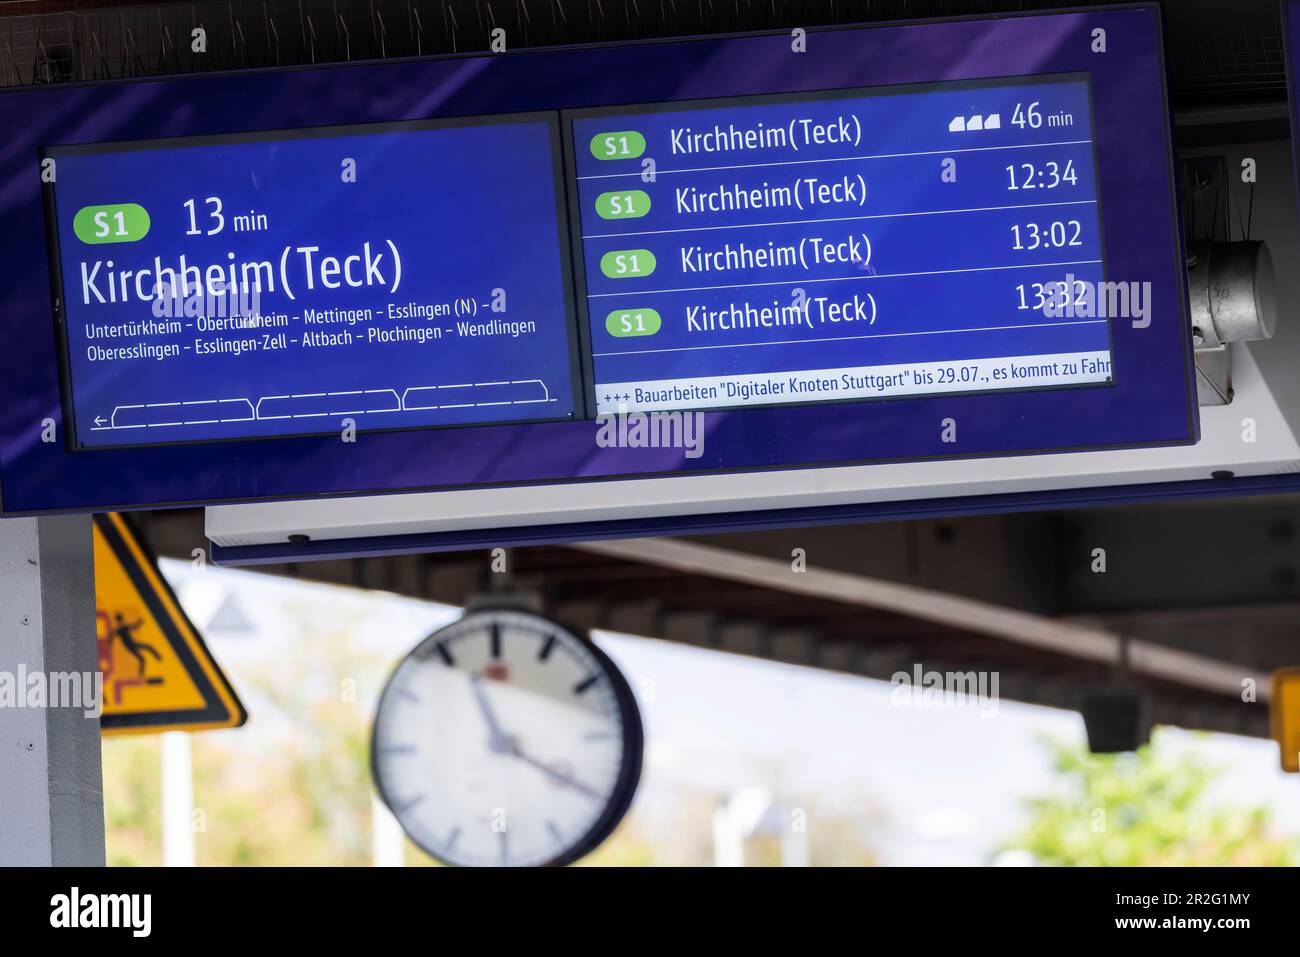 Construction work on digital node, ETCS, display board, obstructions in rail traffic, Germany's first digitalised rail node across all train types Stock Photo